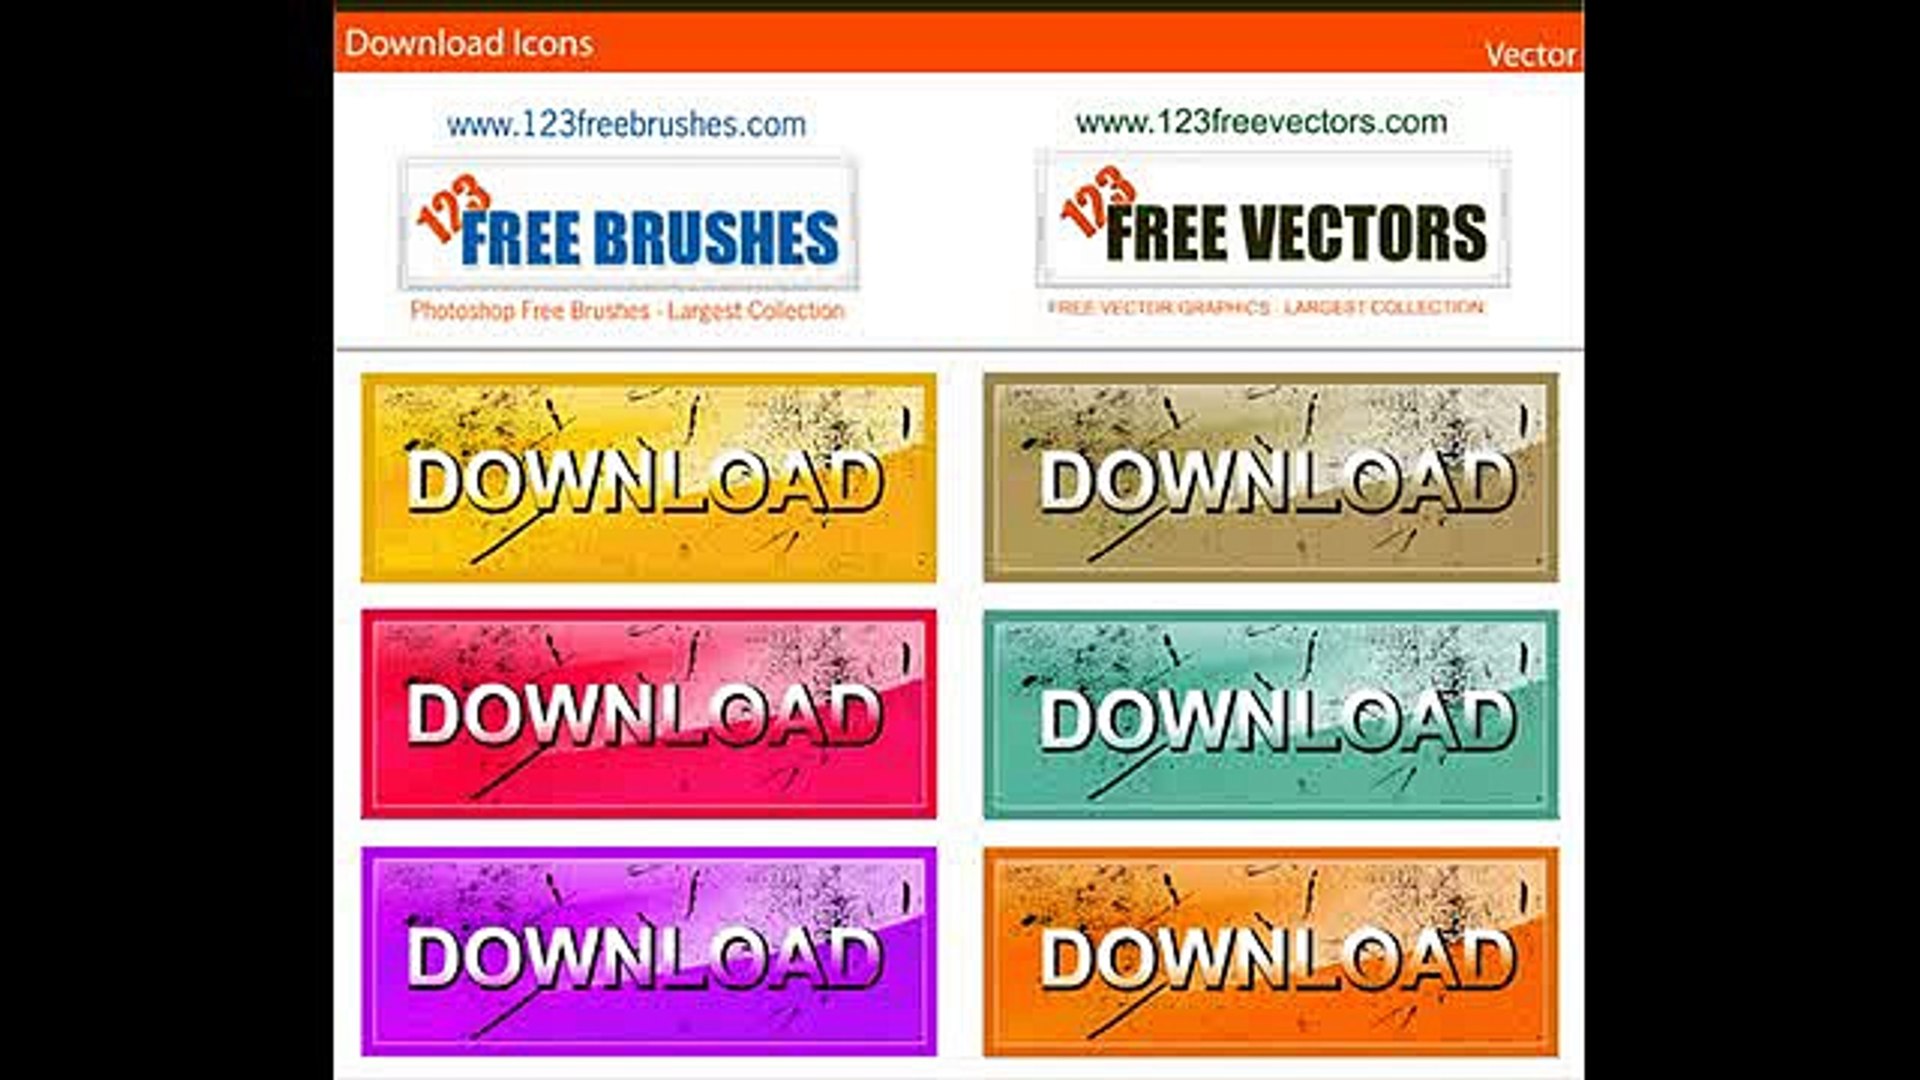 Tvpaint Free Download Crack For Windows - Collection